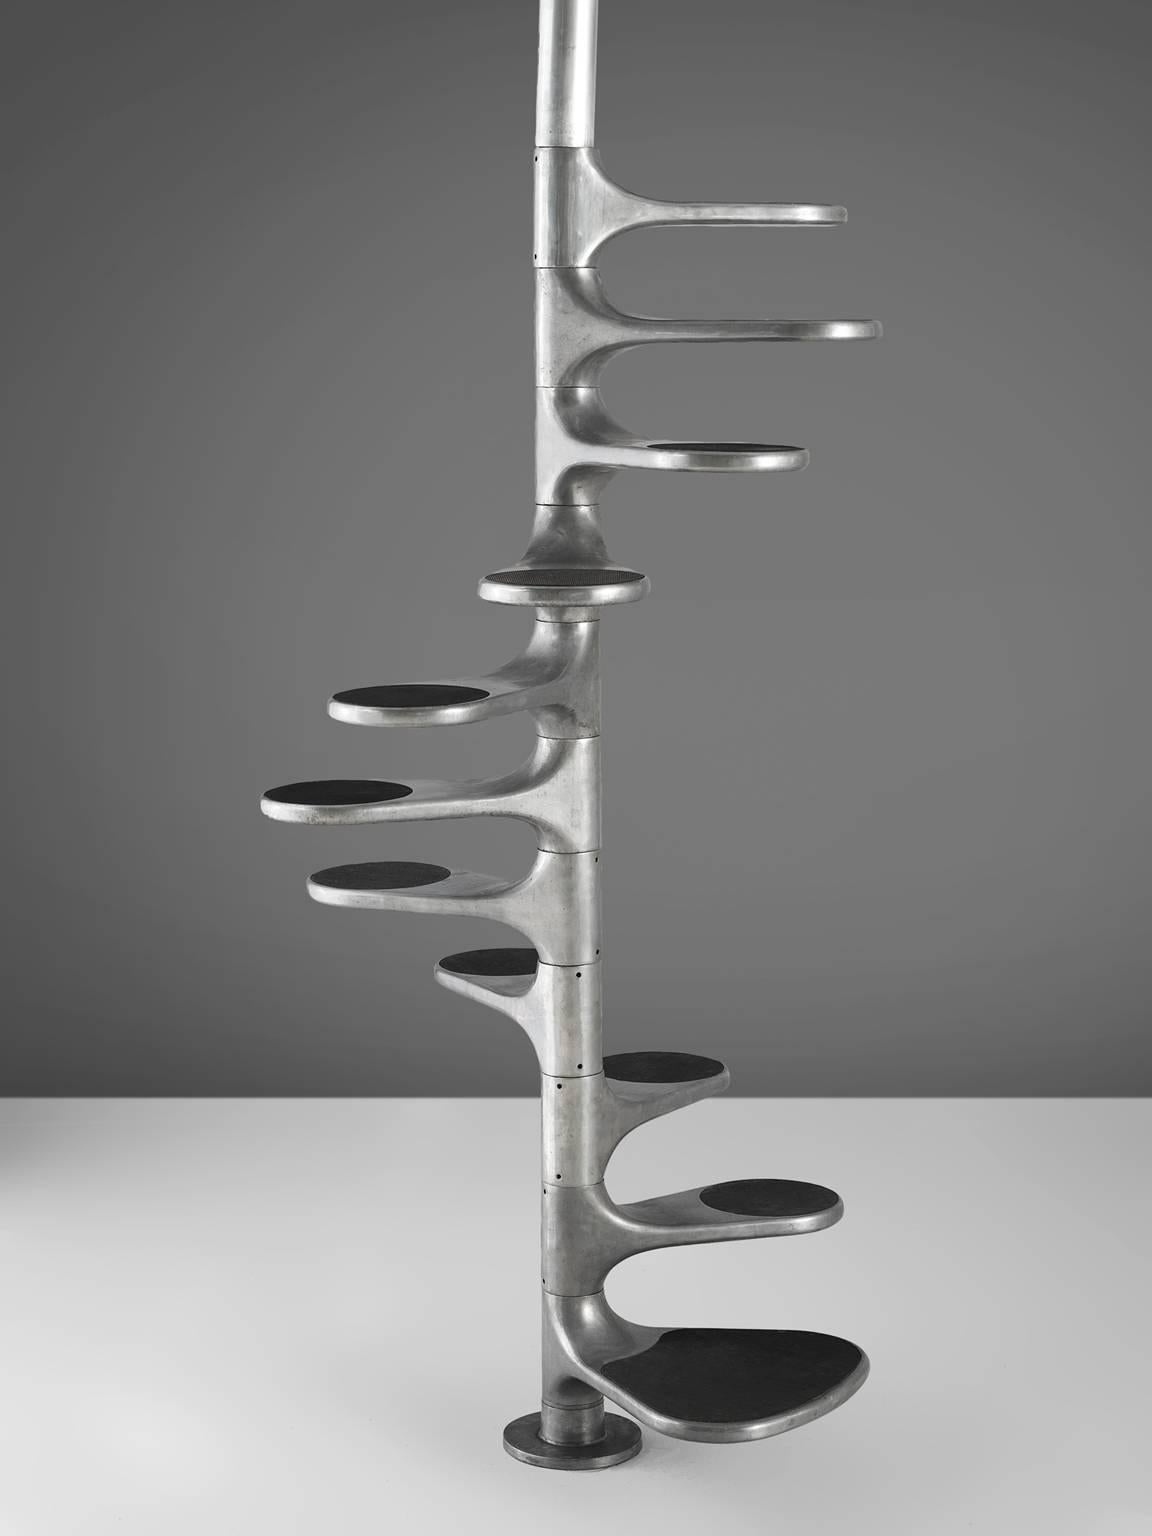 Roger Tallon for Galerie Lacloche, 'Helicoid' staircase, aluminum, France, design 1964, production 1960s.

This staircase with a rubber step surface is called the Helicloid staircase and is part of the 